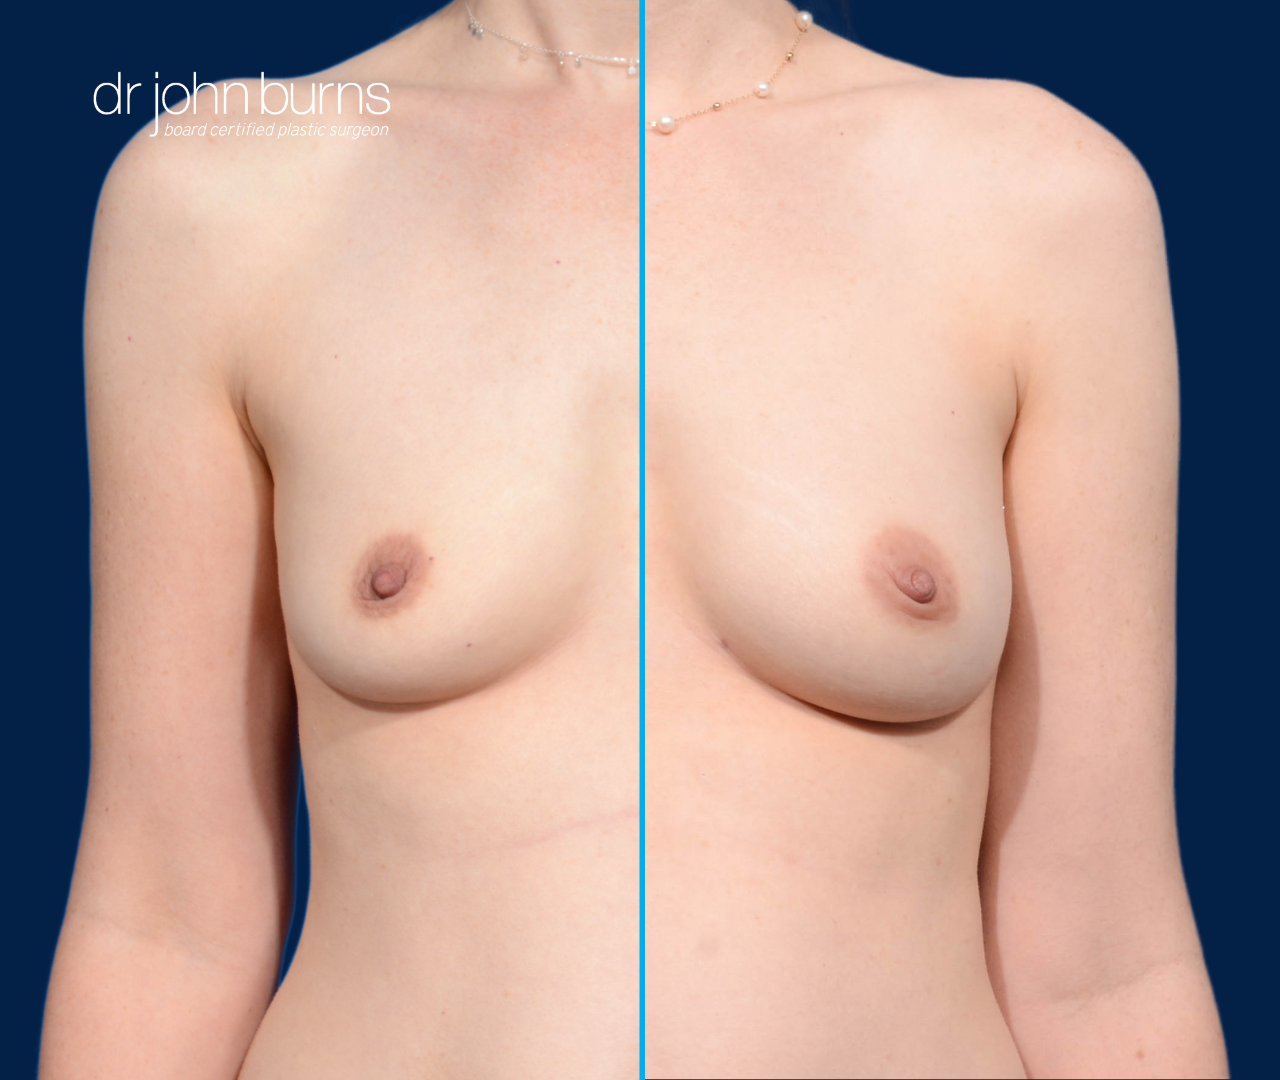 case 6- split screen before & after fat transfer to breast by top plastic surgeon, Dr. John Burns